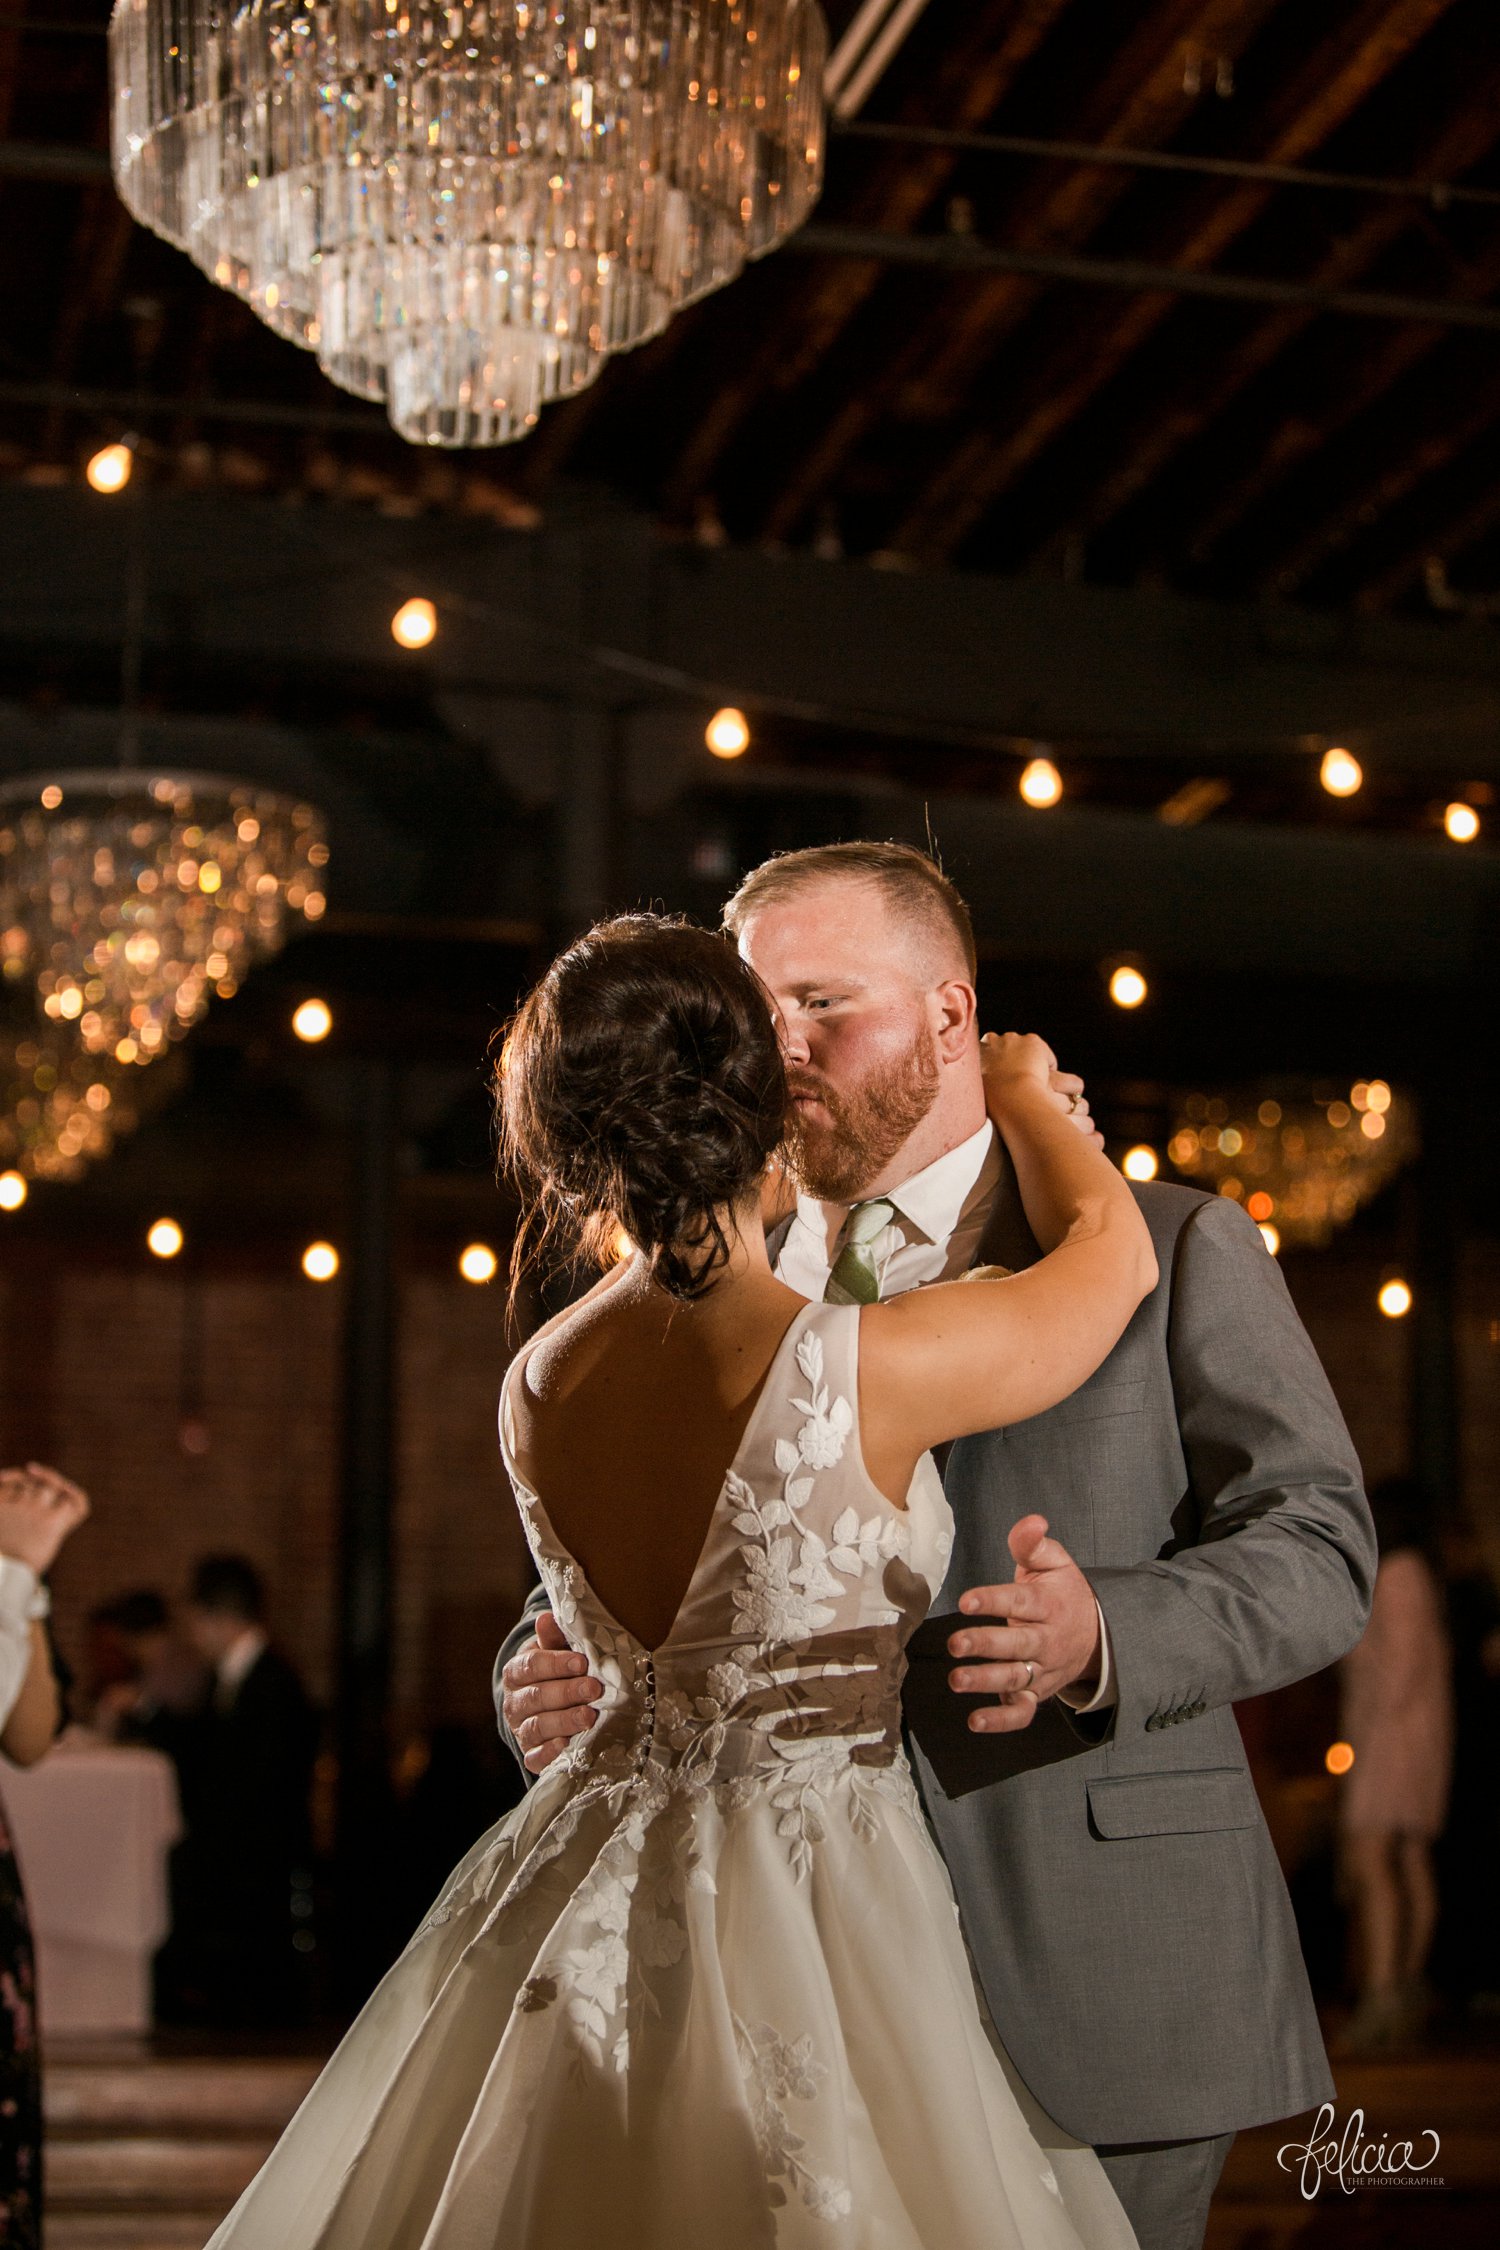 images by feliciathephotographer.com | magnolia venue | urban garden wedding | photographer | kansas city missouri | details | chandelier | first dance | mr and mrs | romantic | floral lace gown | something white bridal boutique | the groomsman suit | grey and green | 